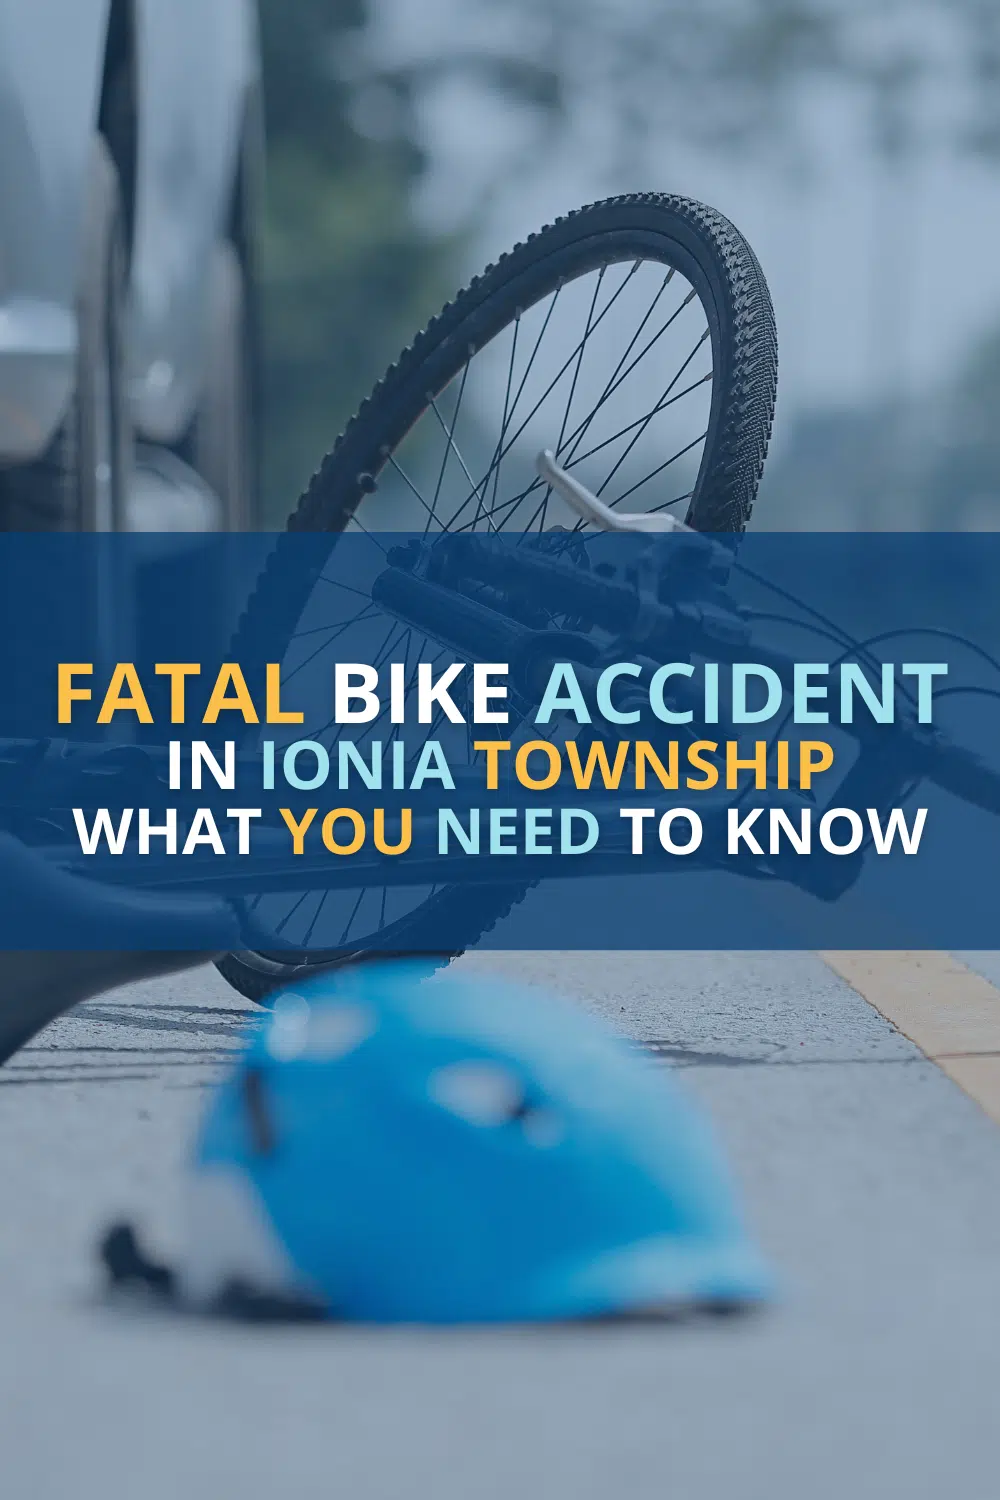 Fatal Bicycle Accident in Ionia Township: What You Need To Know